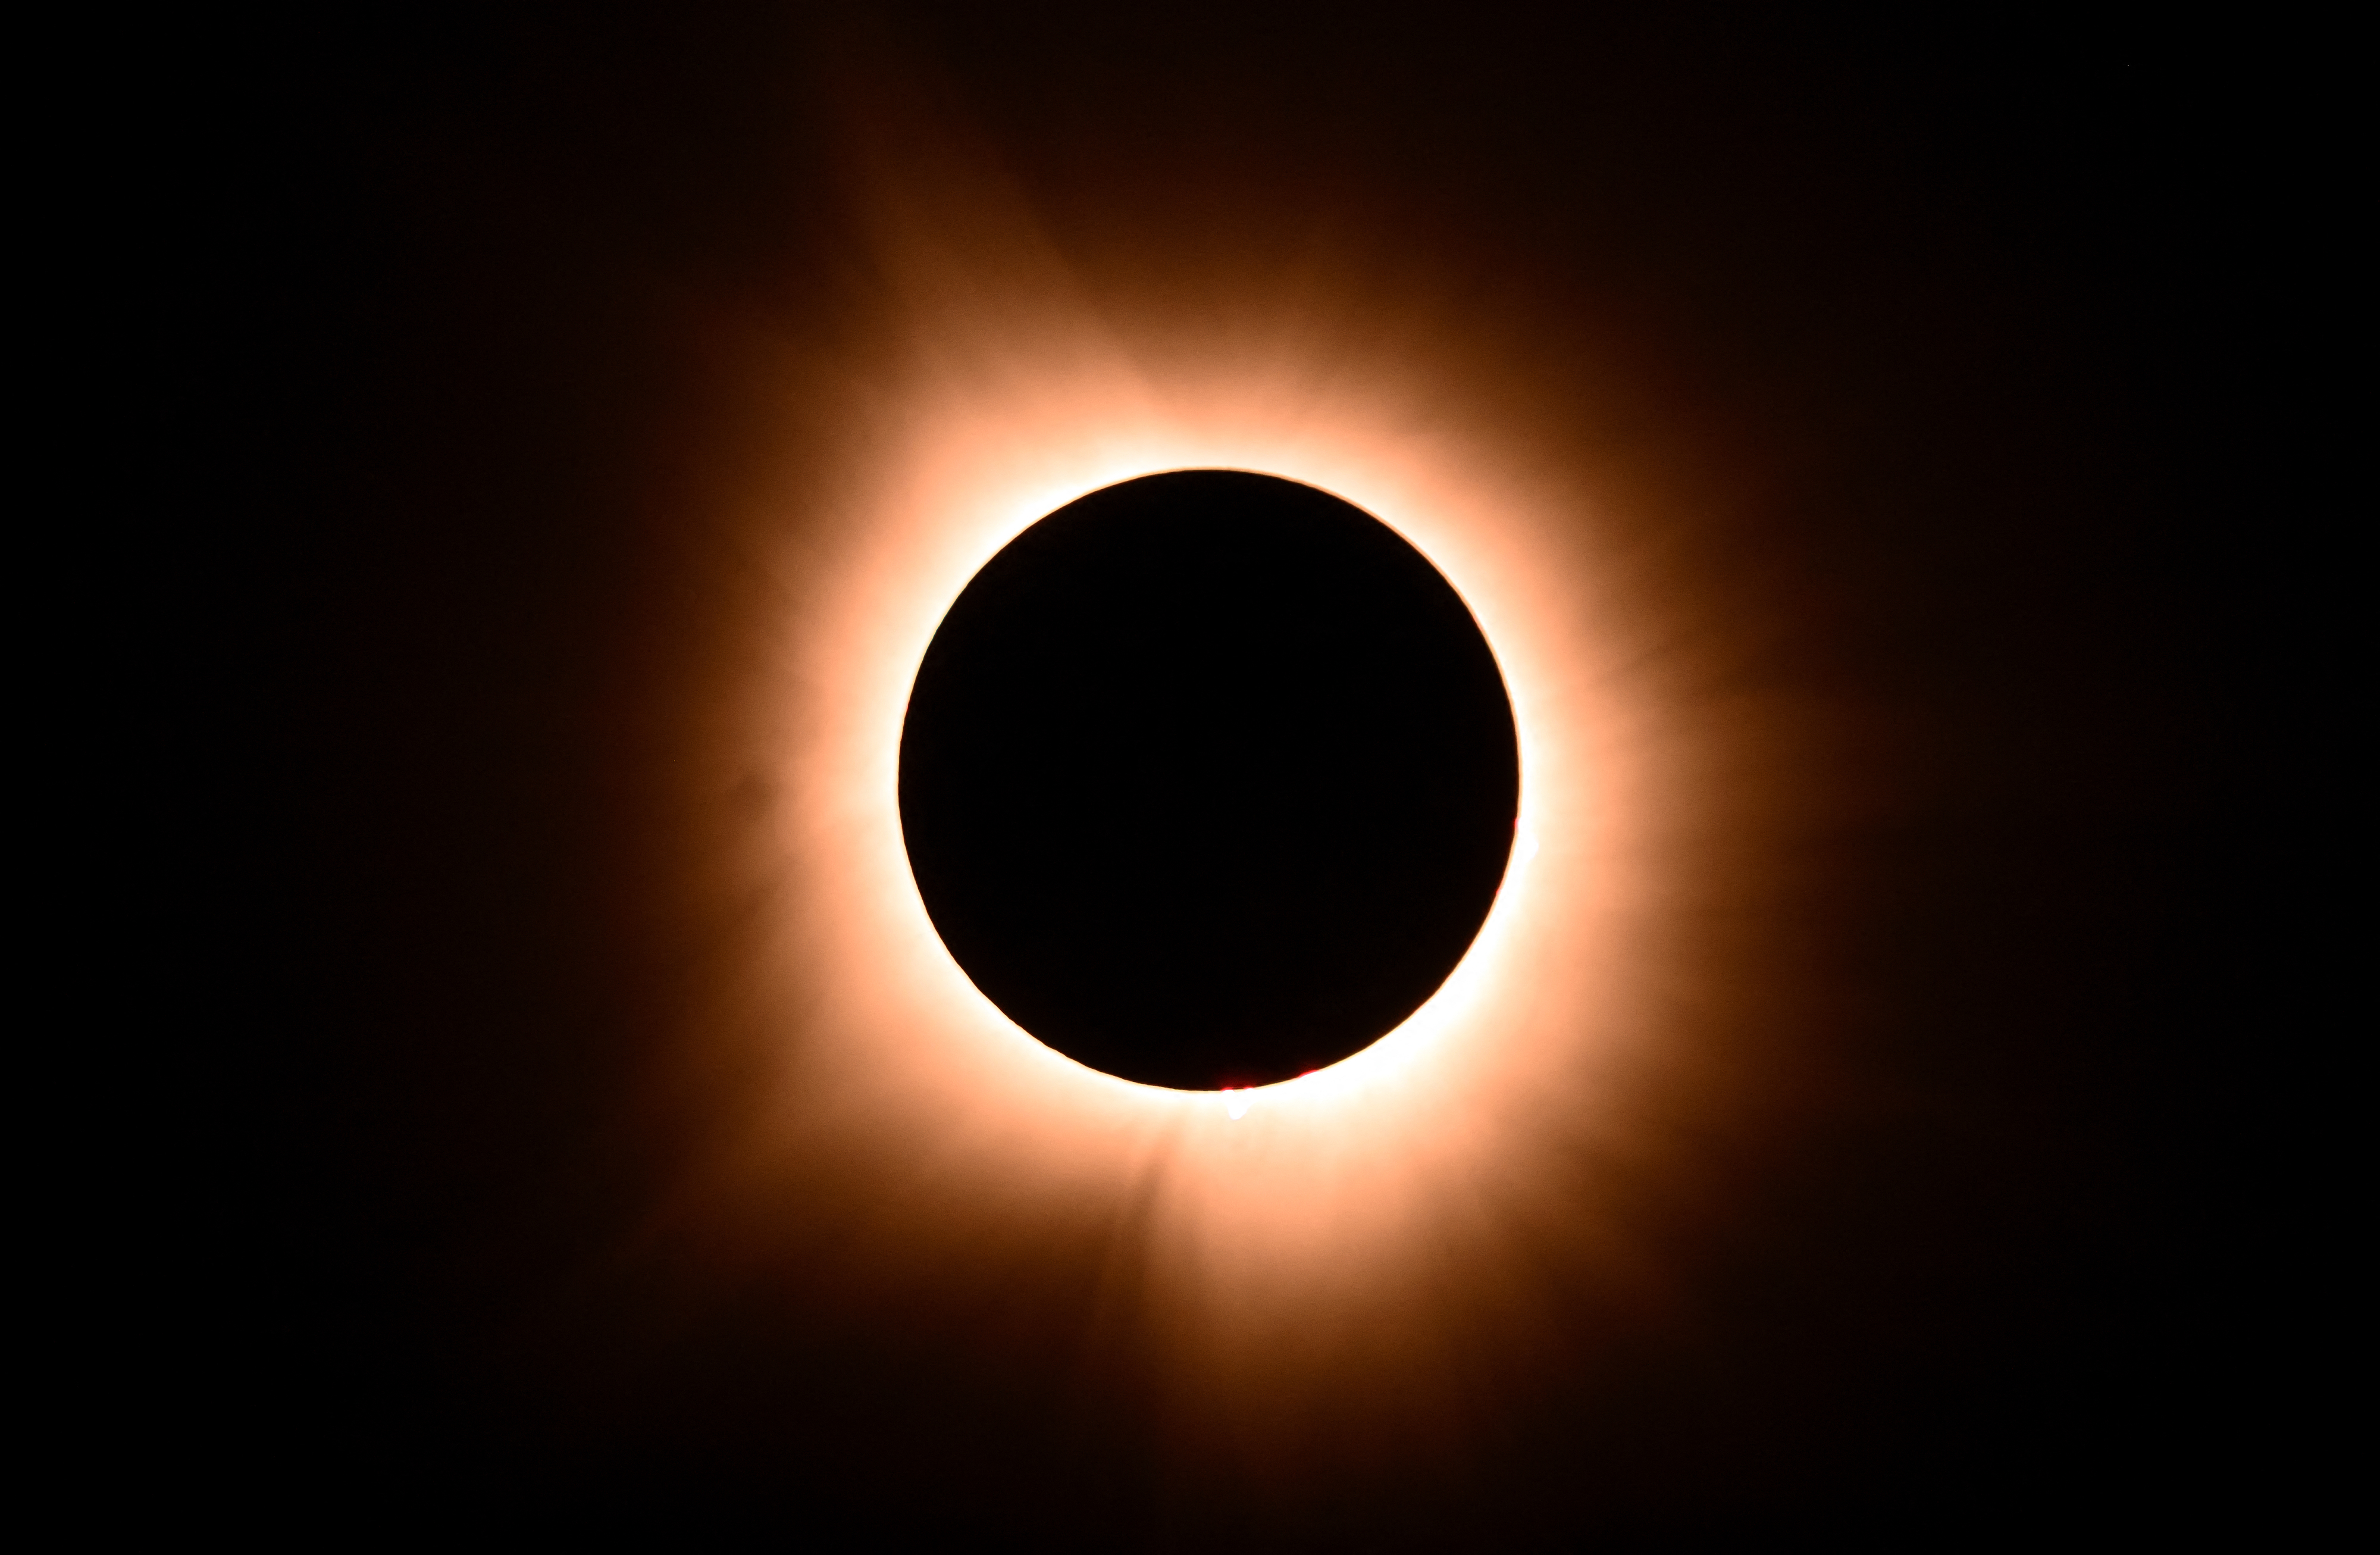 Solar eclipse with the moon covering the sun, creating a glowing corona